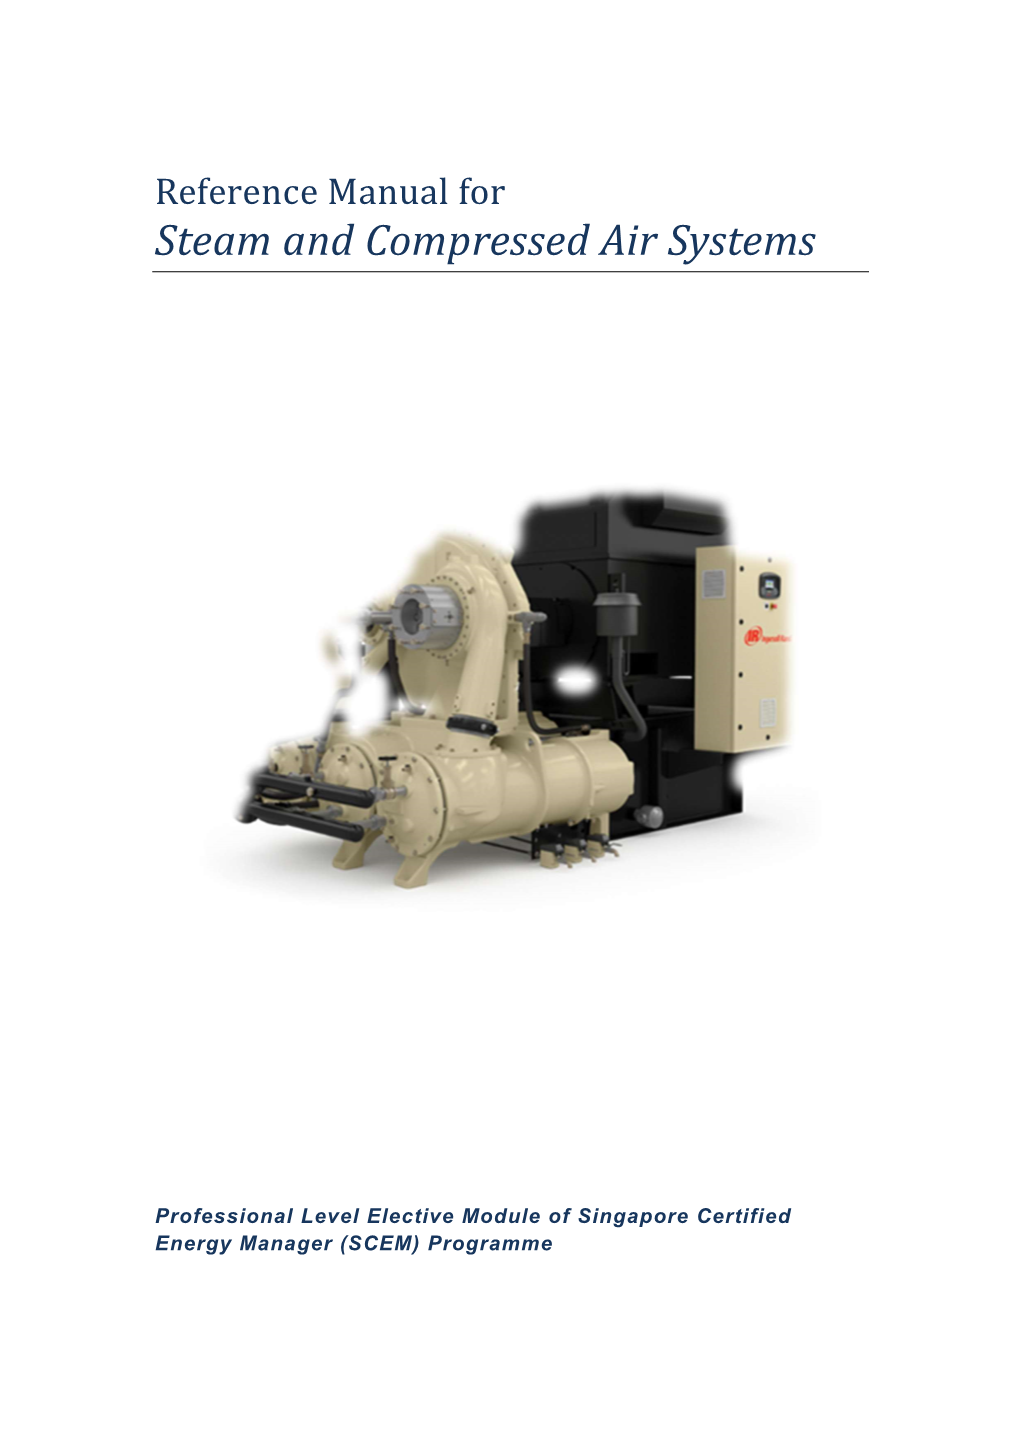 Reference Manual for Steam and Compressed Air Systems